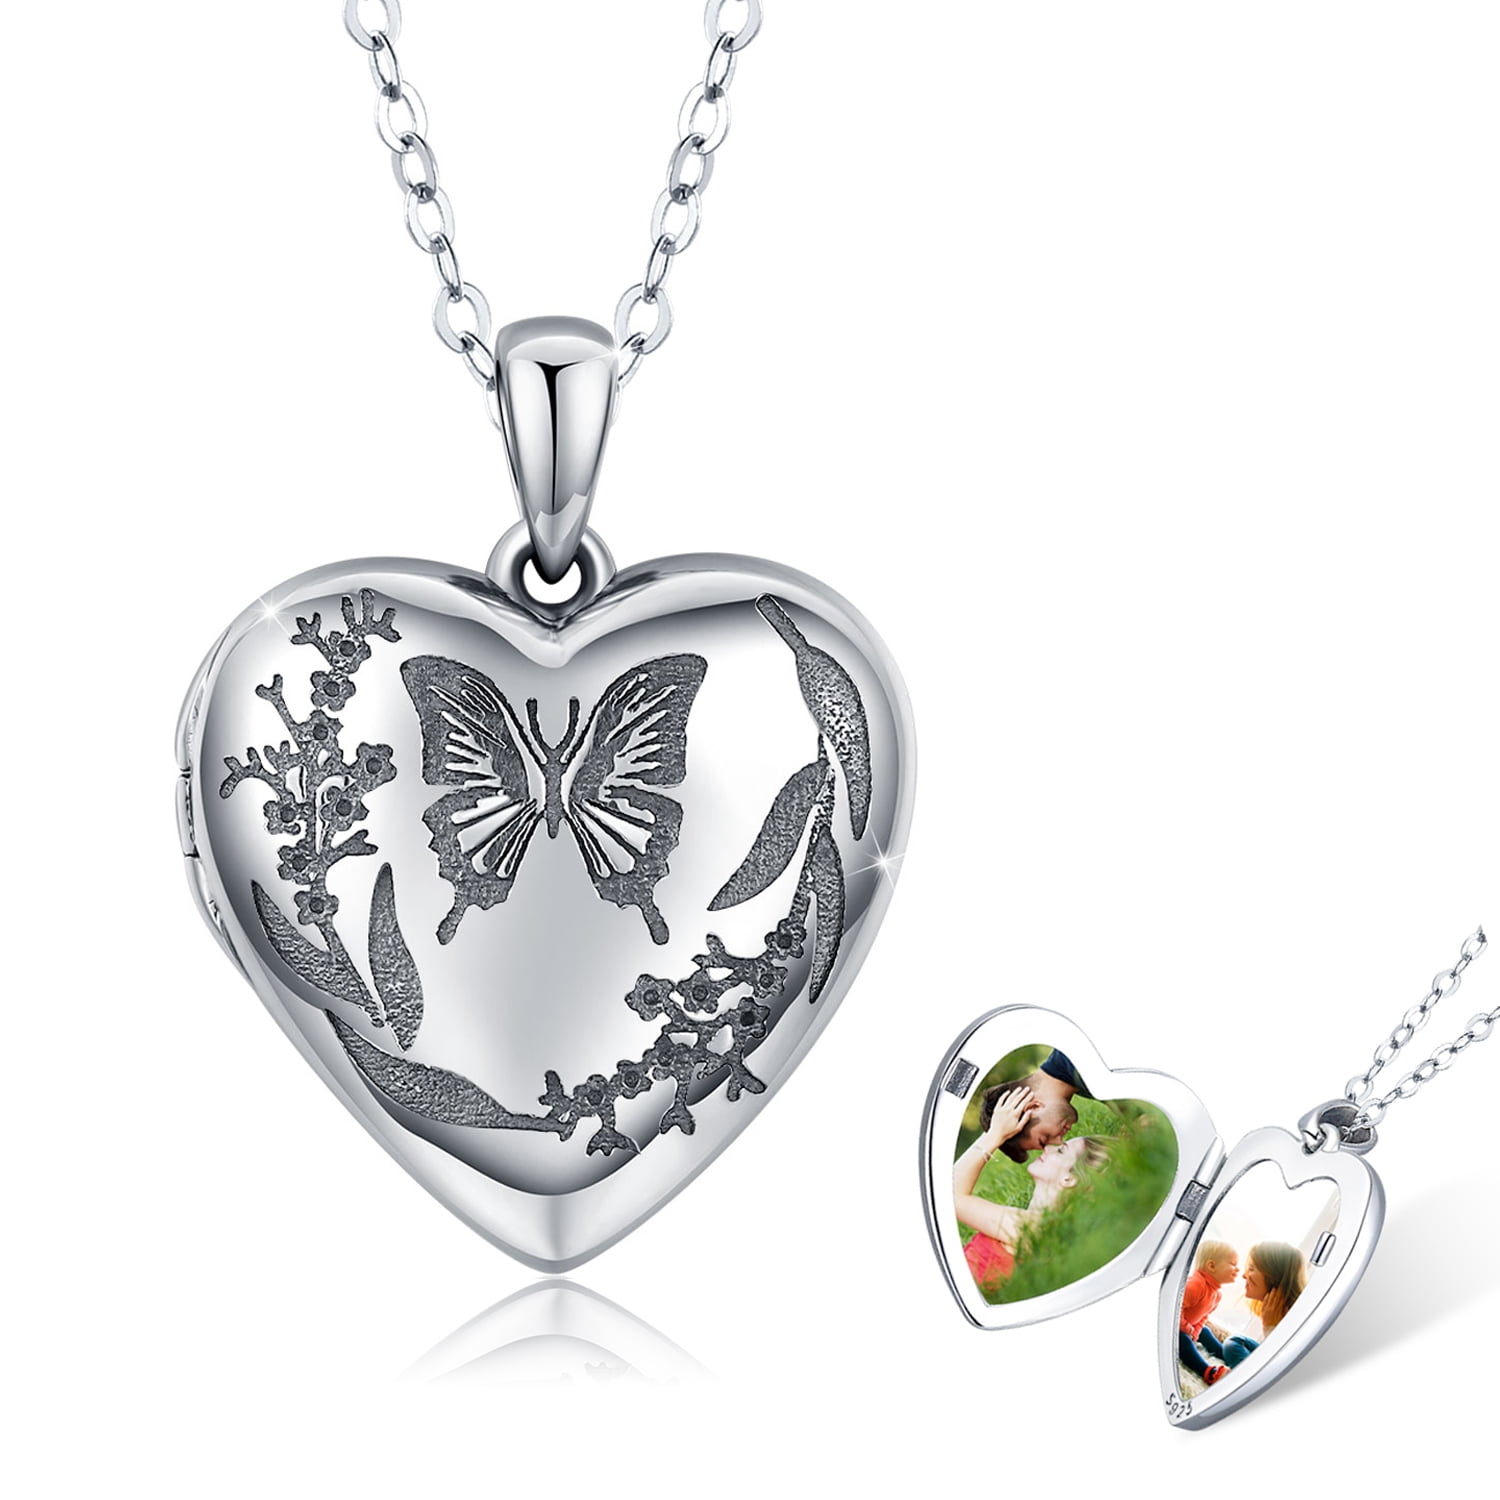 Lovely 925 silver butterfly pendant and chain in gift box great birthday or mother's day gift idea